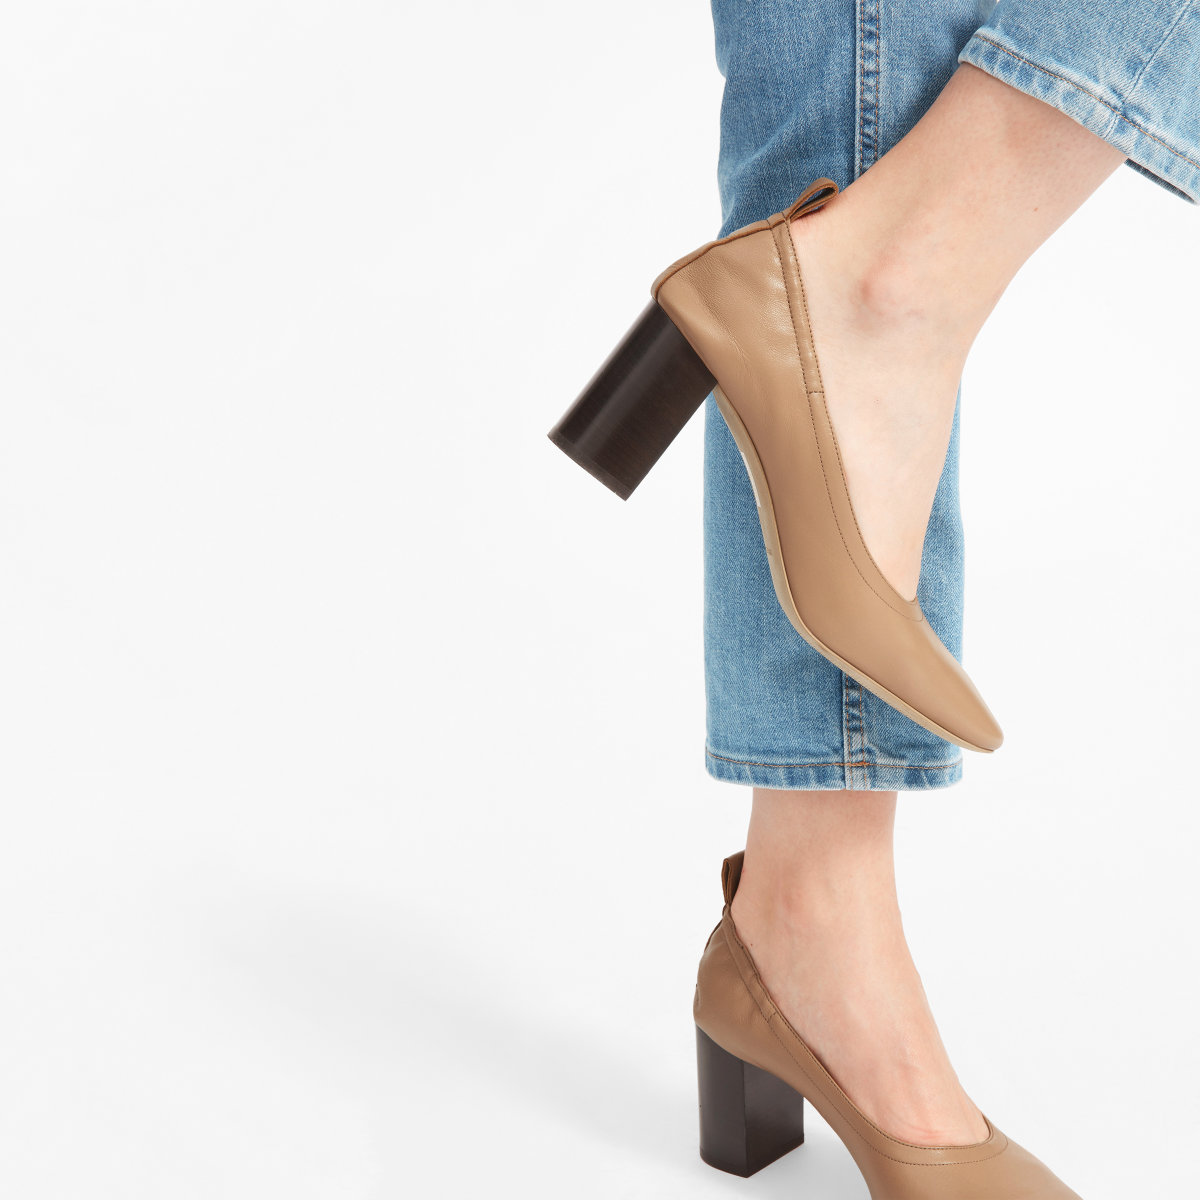 The Day High Heel by Everlane in Blush